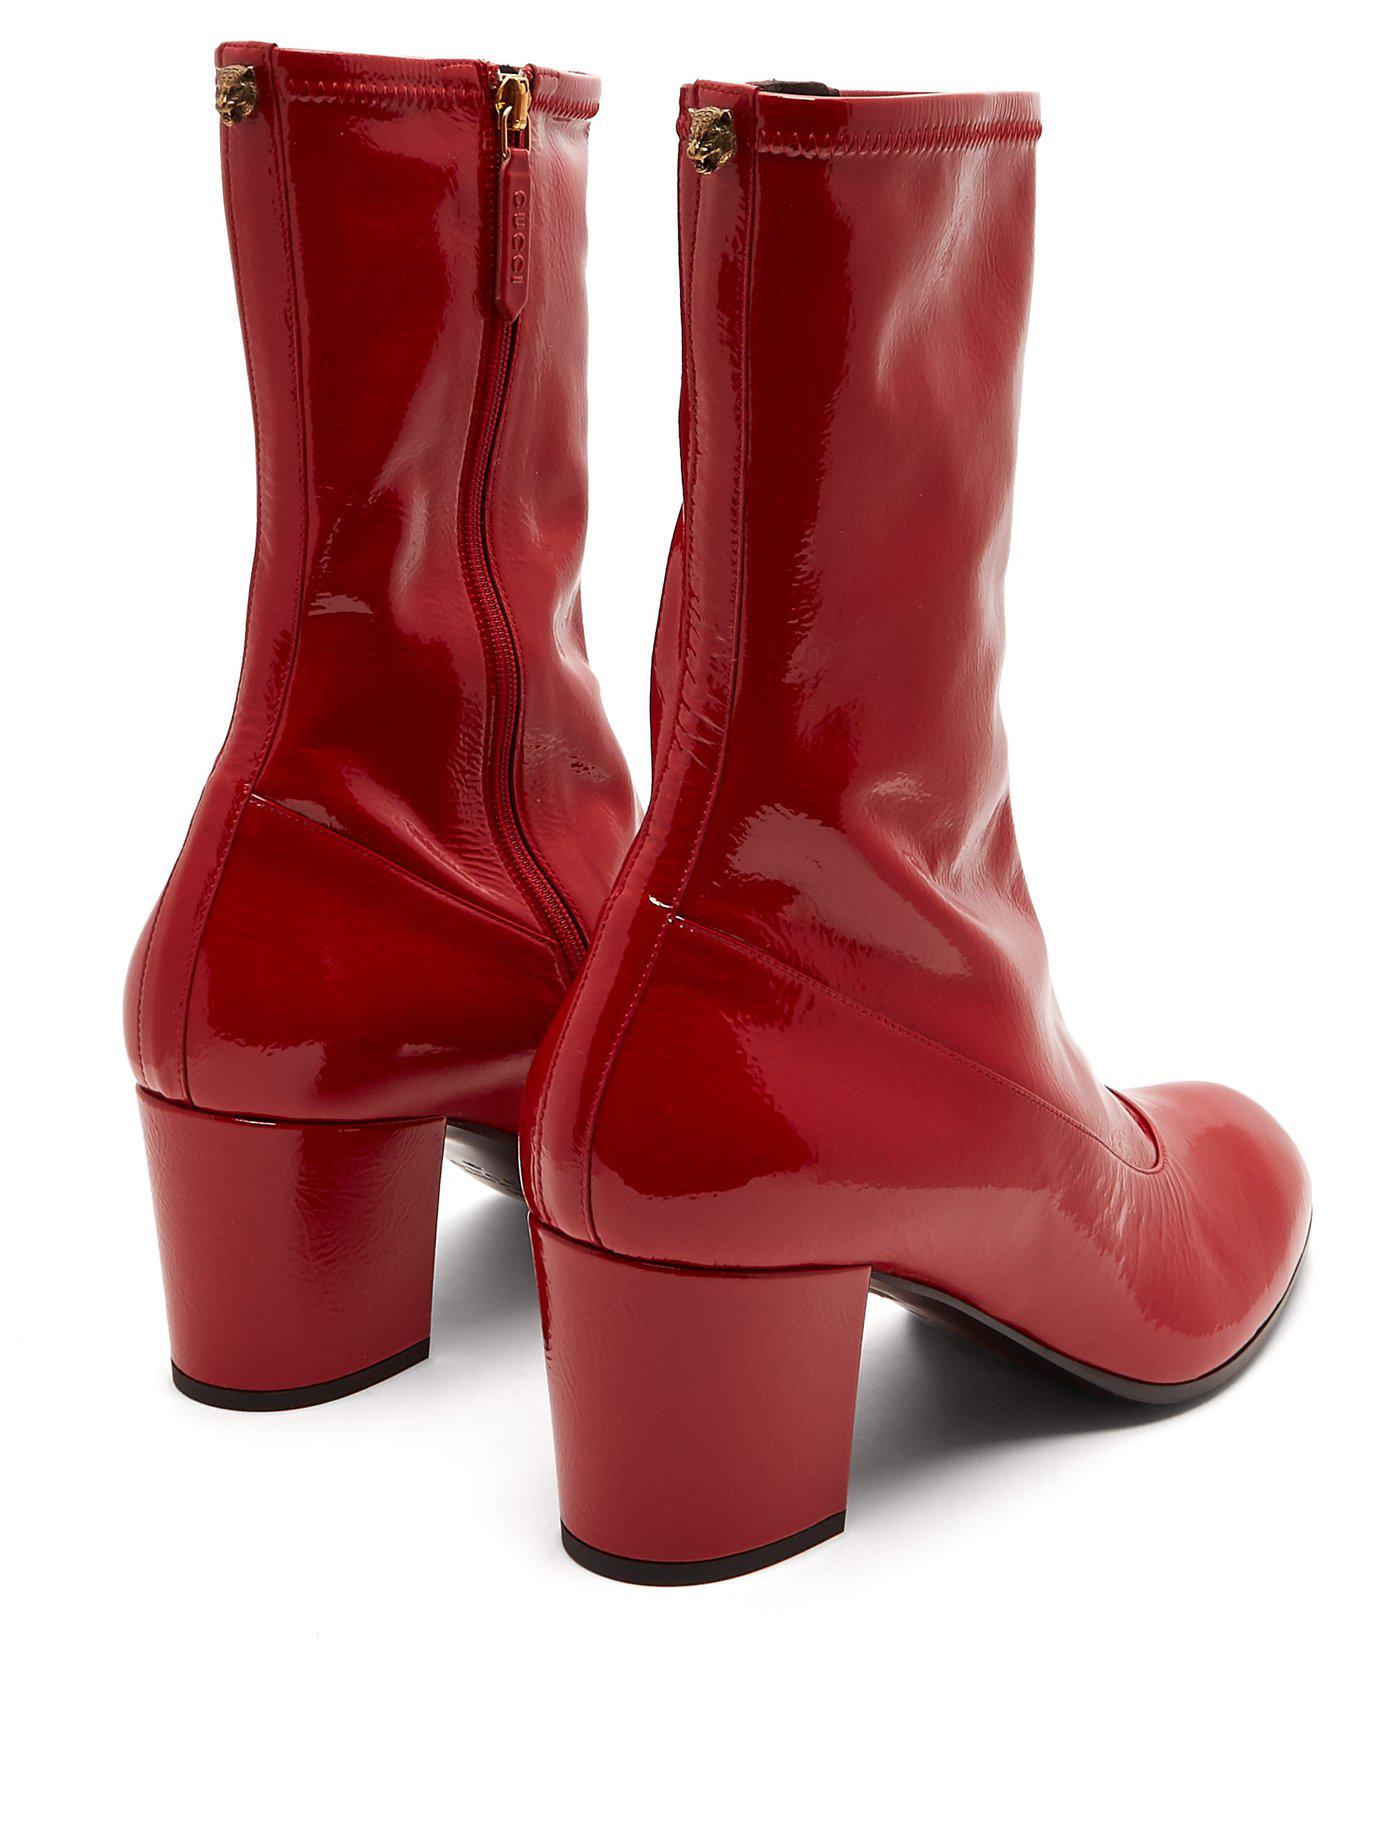 patent red leather boots